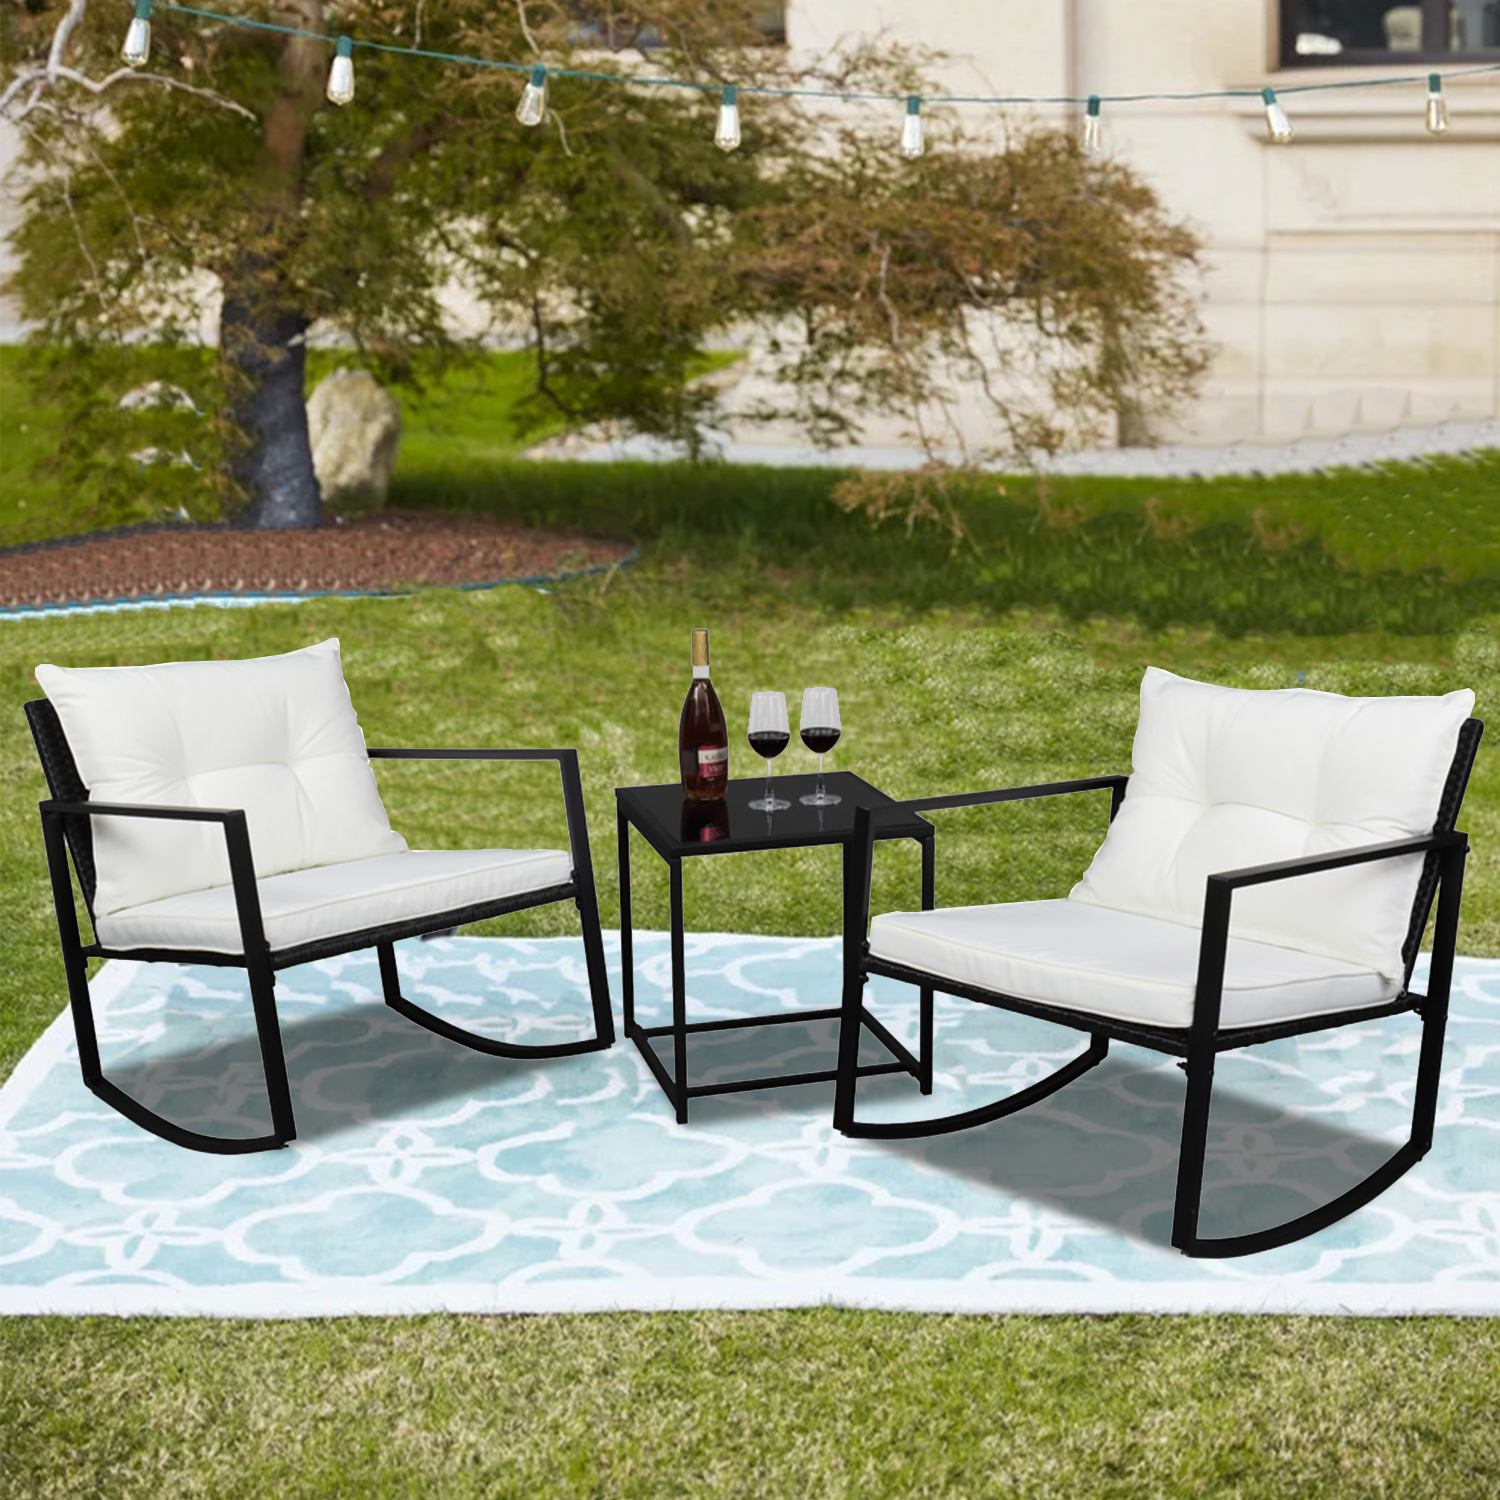 3 Piece Wicker Rocking Chair Set, Patio Furniture with Rocking Chairs and Coffee Table, Outdoor Rocking Chair Sets for Lawn, Yard, Garden, Rocker Bistro Set, Patio Lounge Chair, White Cushion, W10681 - image 1 of 9